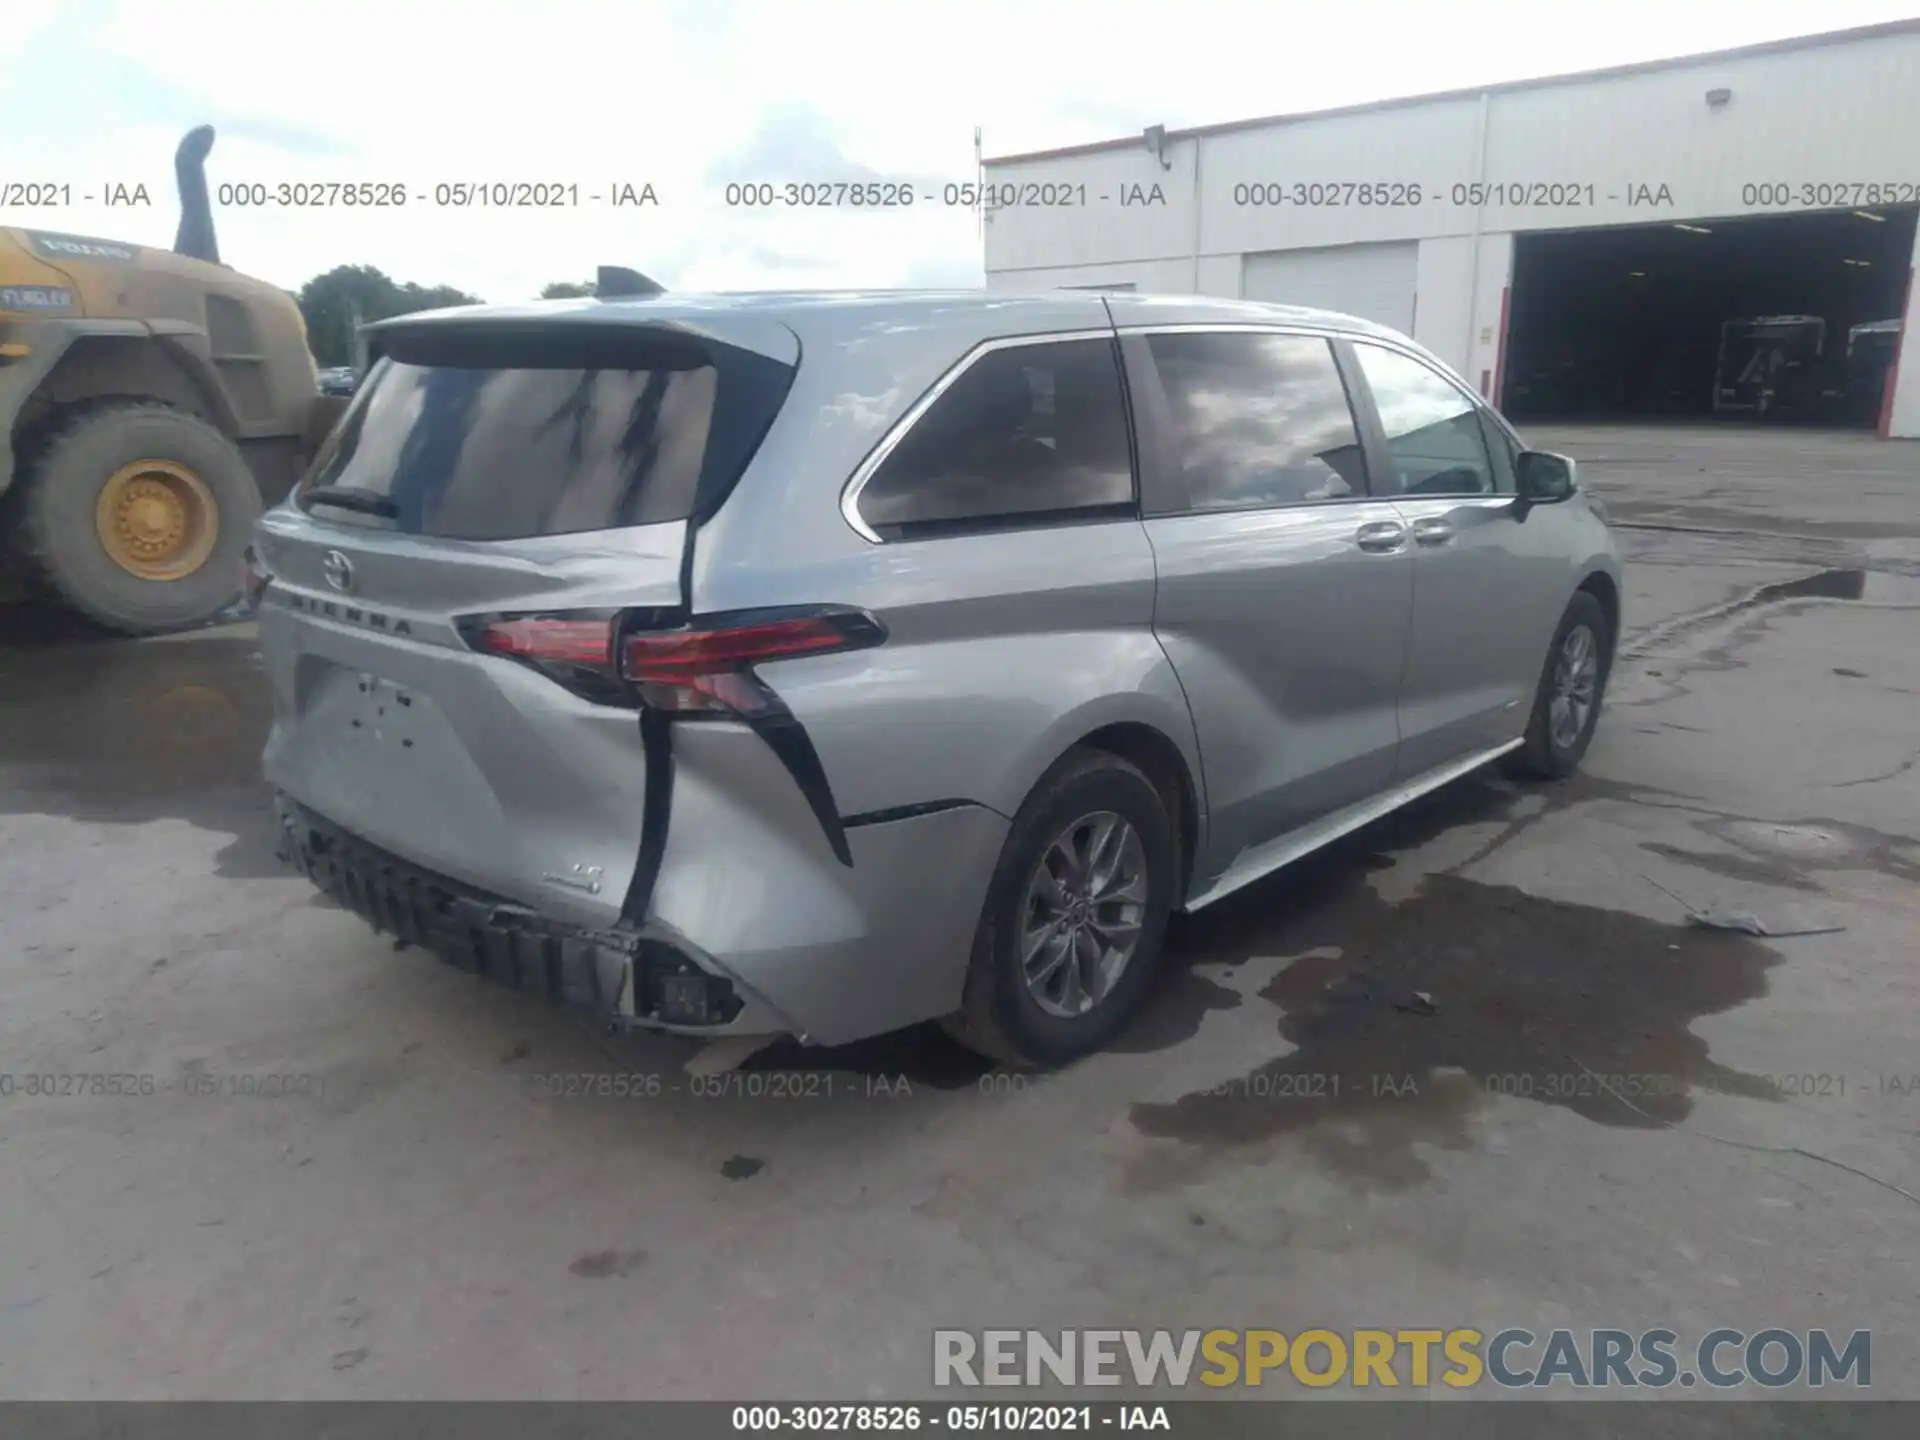 4 Photograph of a damaged car 5TDKRKEC1MS017079 TOYOTA SIENNA 2021